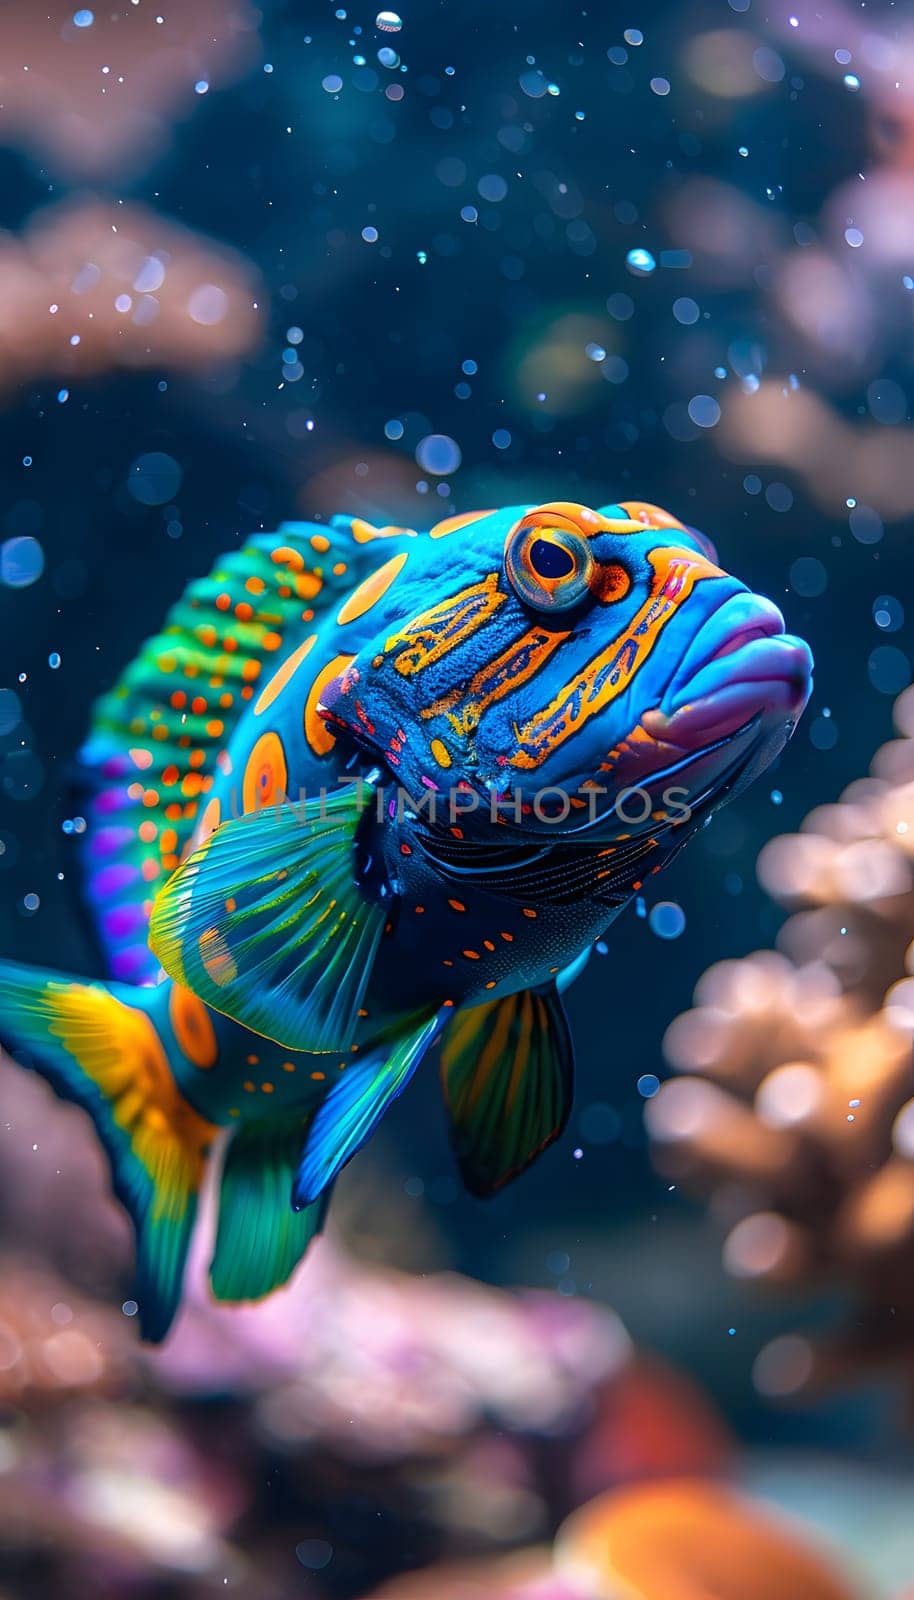 Electric blue fish swims near coral reef in underwater natural environment by Nadtochiy